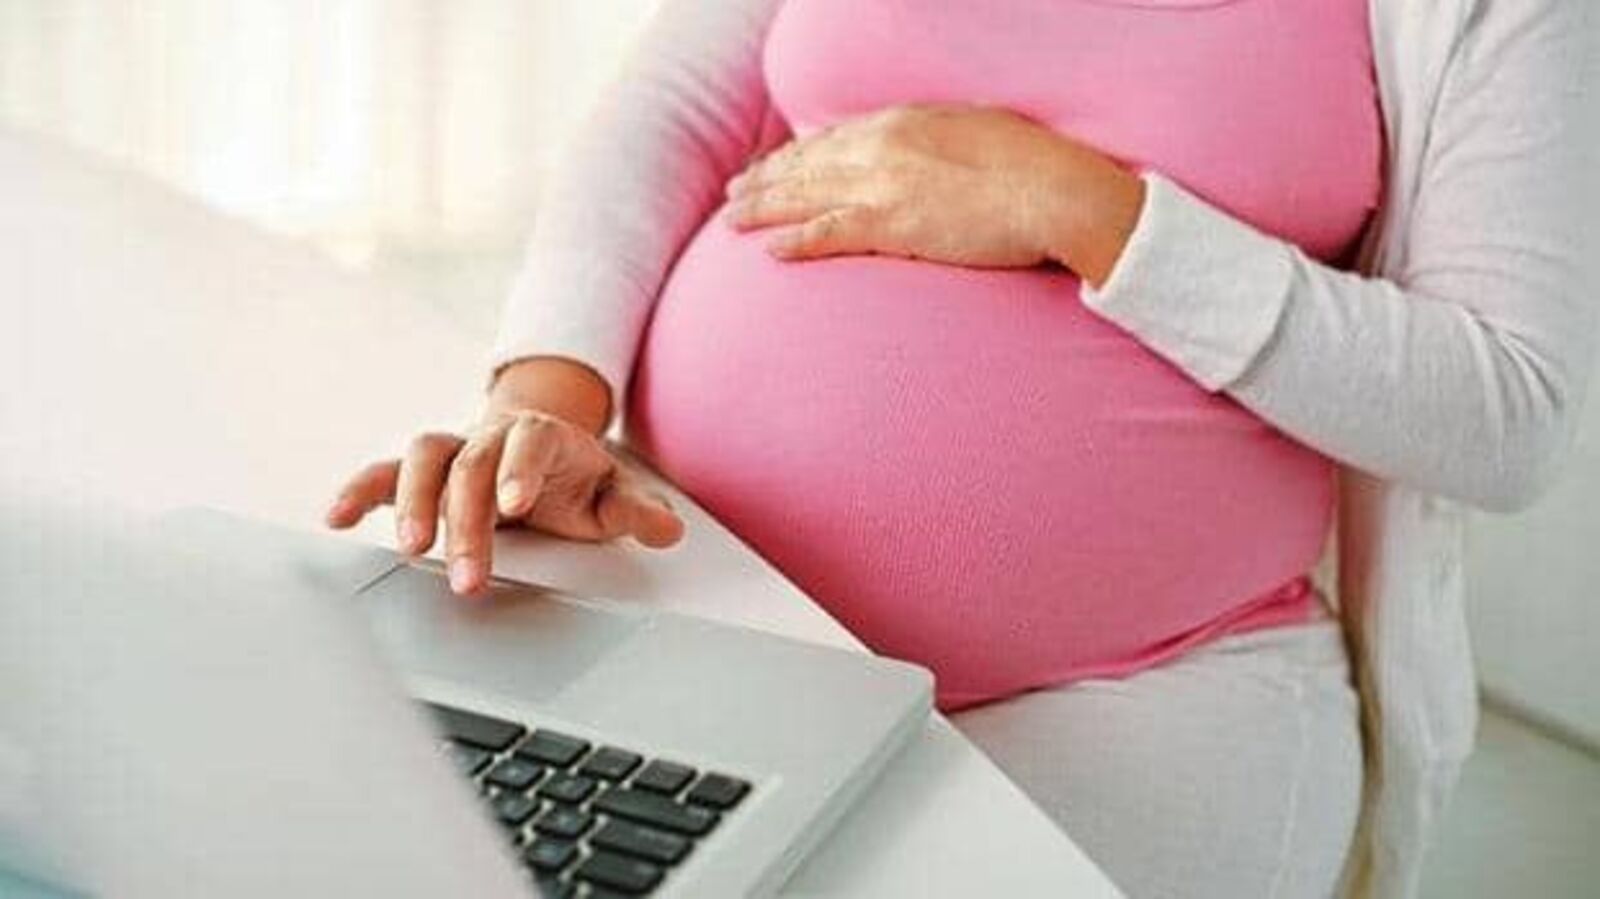 Why should you consider maternity insurance before starting a family? Here are 5 key reasons